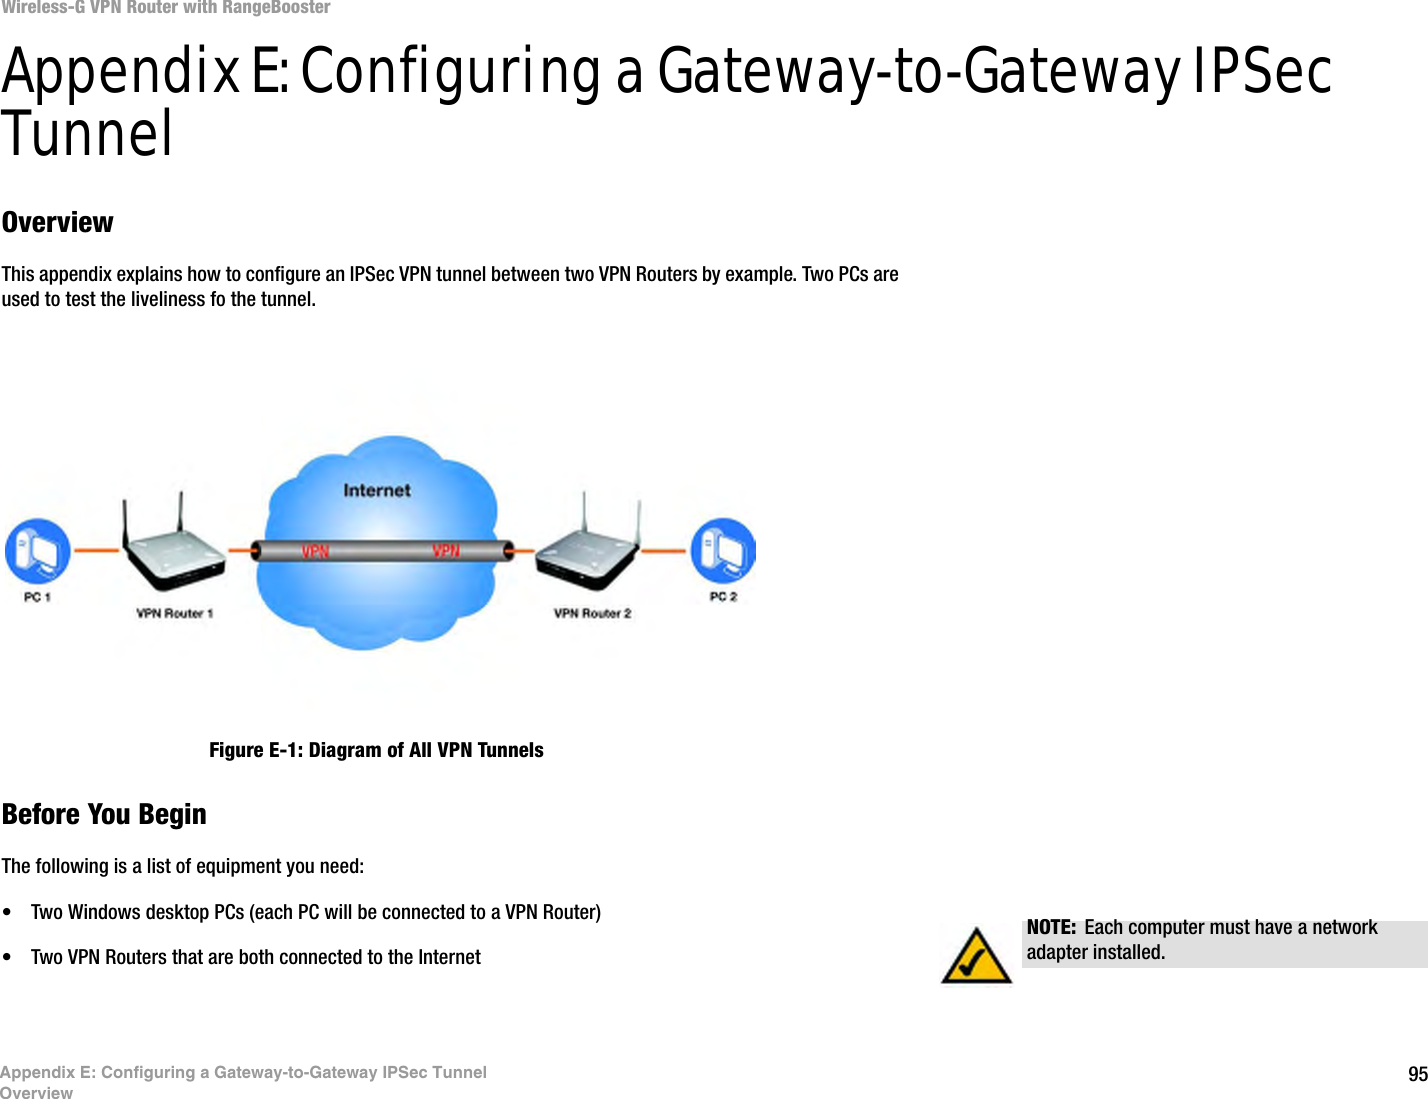 95Wireless-G VPN Router with RangeBoosterAppendix E: Configuring a Gateway-to-Gateway IPSec TunnelOverviewAppendix E: Configuring a Gateway-to-Gateway IPSec TunnelOverviewThis appendix explains how to configure an IPSec VPN tunnel between two VPN Routers by example. Two PCs are used to test the liveliness fo the tunnel.Before You BeginThe following is a list of equipment you need:• Two Windows desktop PCs (each PC will be connected to a VPN Router)• Two VPN Routers that are both connected to the InternetNOTE: Each computer must have a network adapter installed.Figure E-1: Diagram of All VPN Tunnels